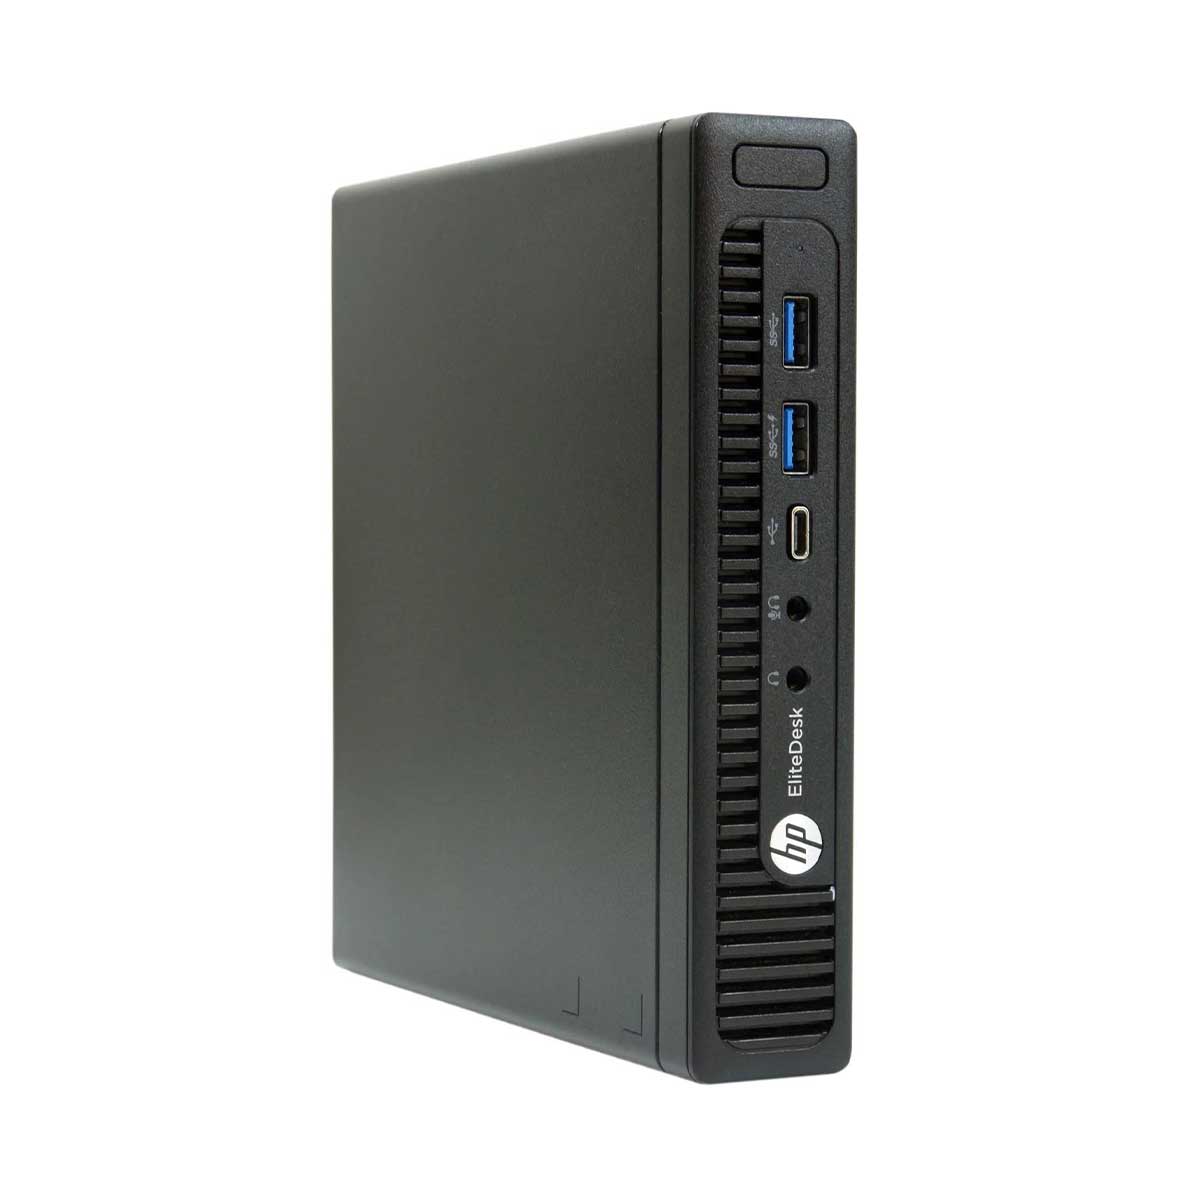 Featured image for “HP EliteDesk 800 G1 DM Core i7 4785T 2.2GHz 8GB SSD128GB”